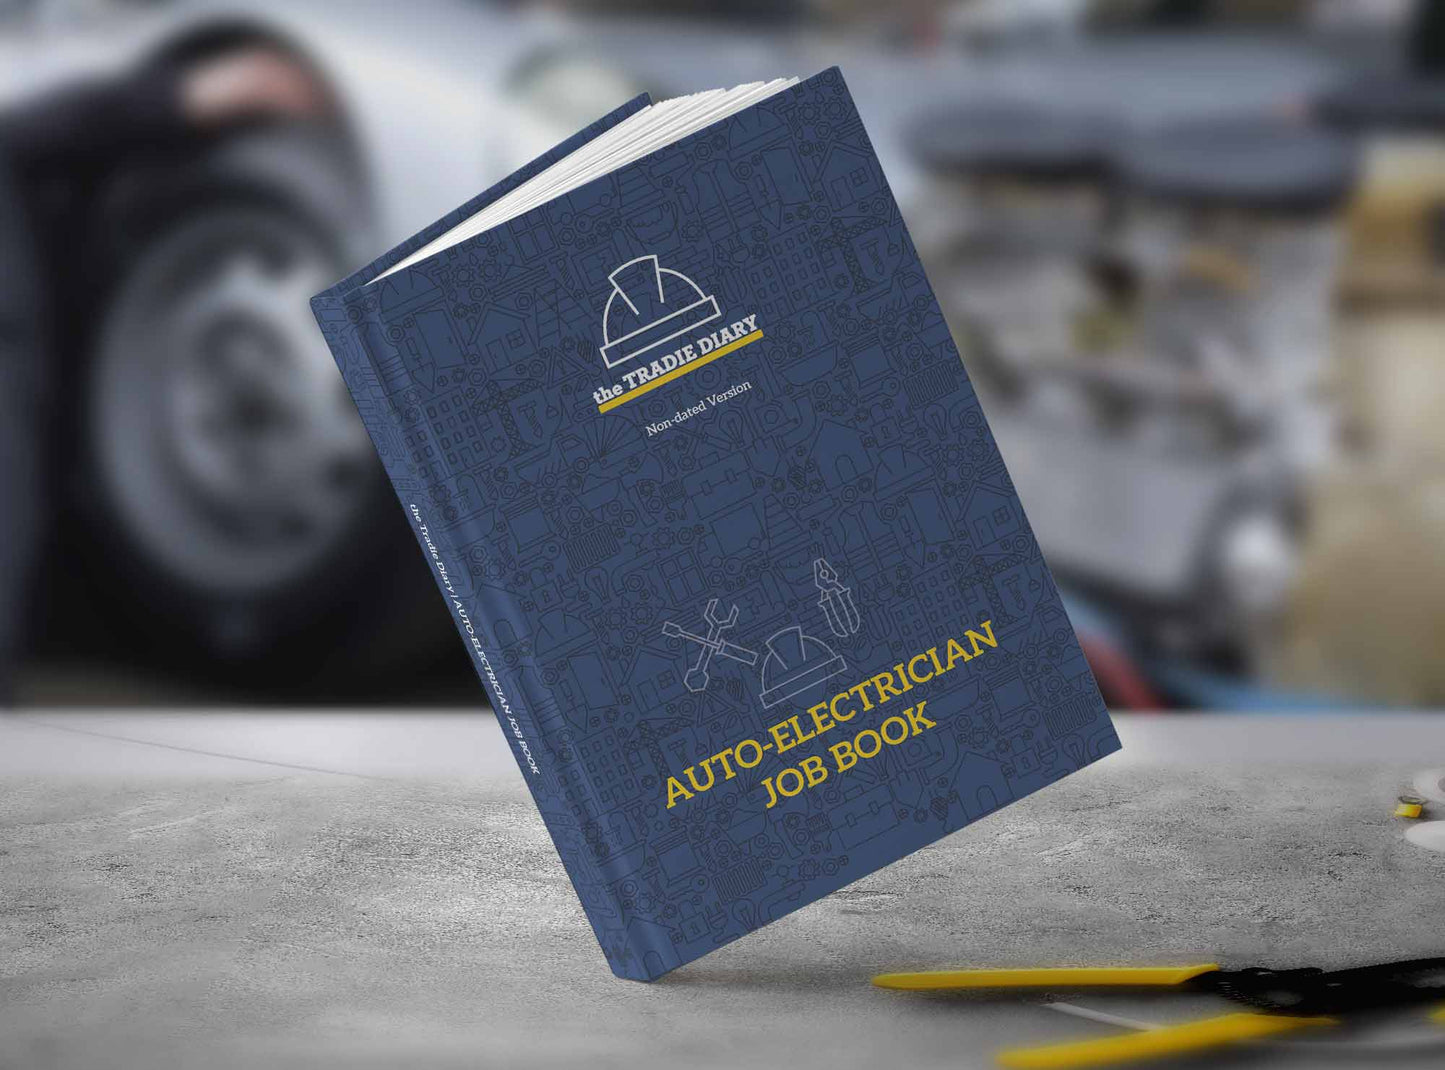 The Tradie Diary: AUTO ELECTRICIAN JOB BOOK - Non Dated